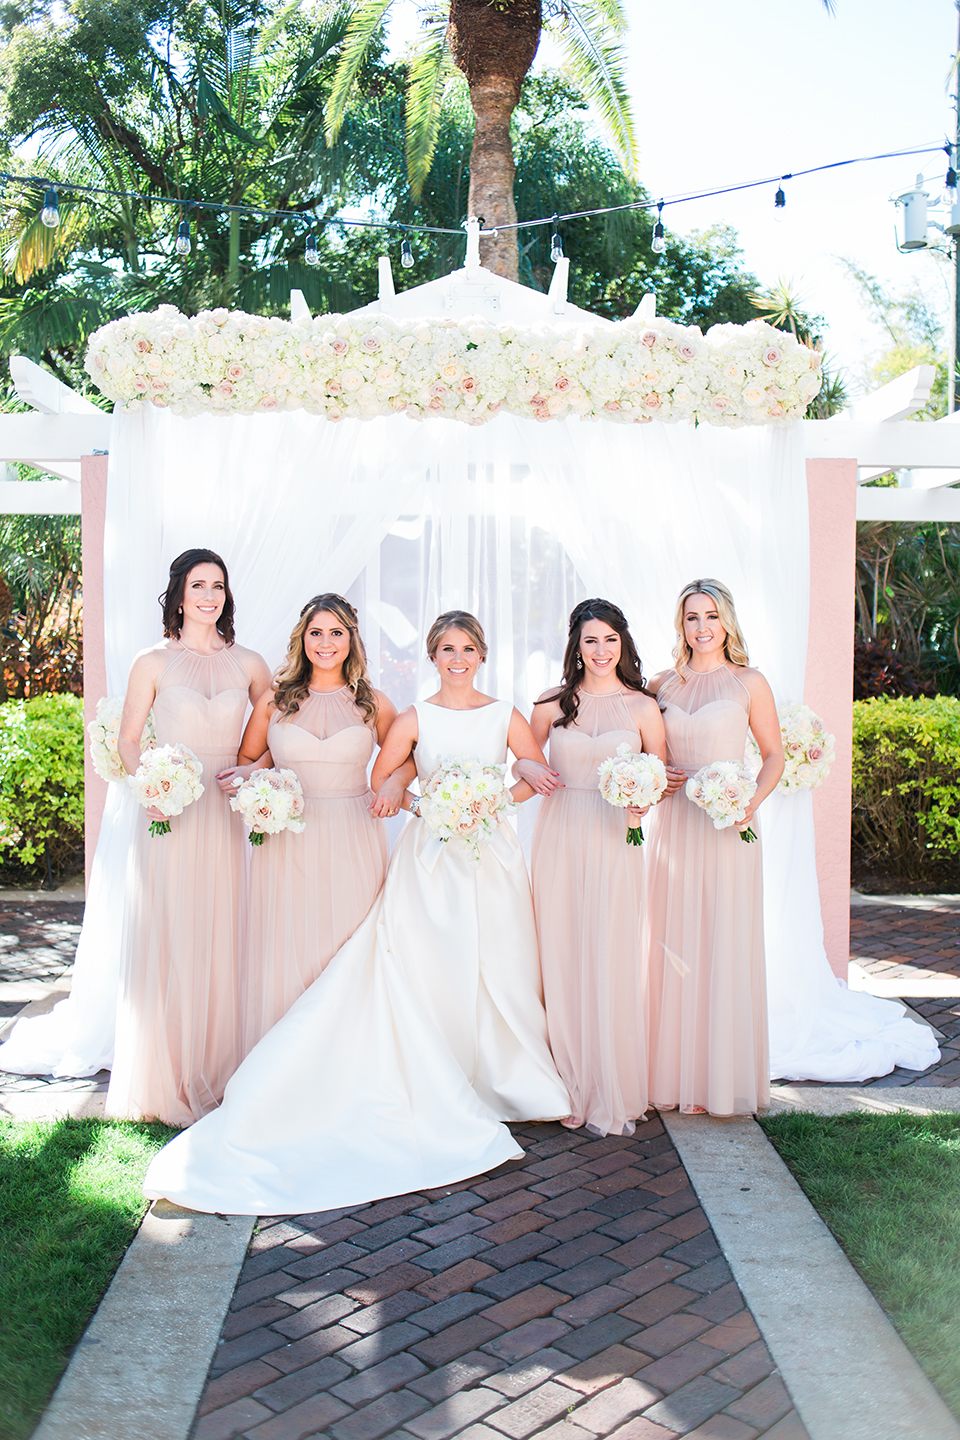 Bride with her bridesmaids on her wedding day at The Vinoy in St. Pete, Florida | Debra Eby Photography Co.